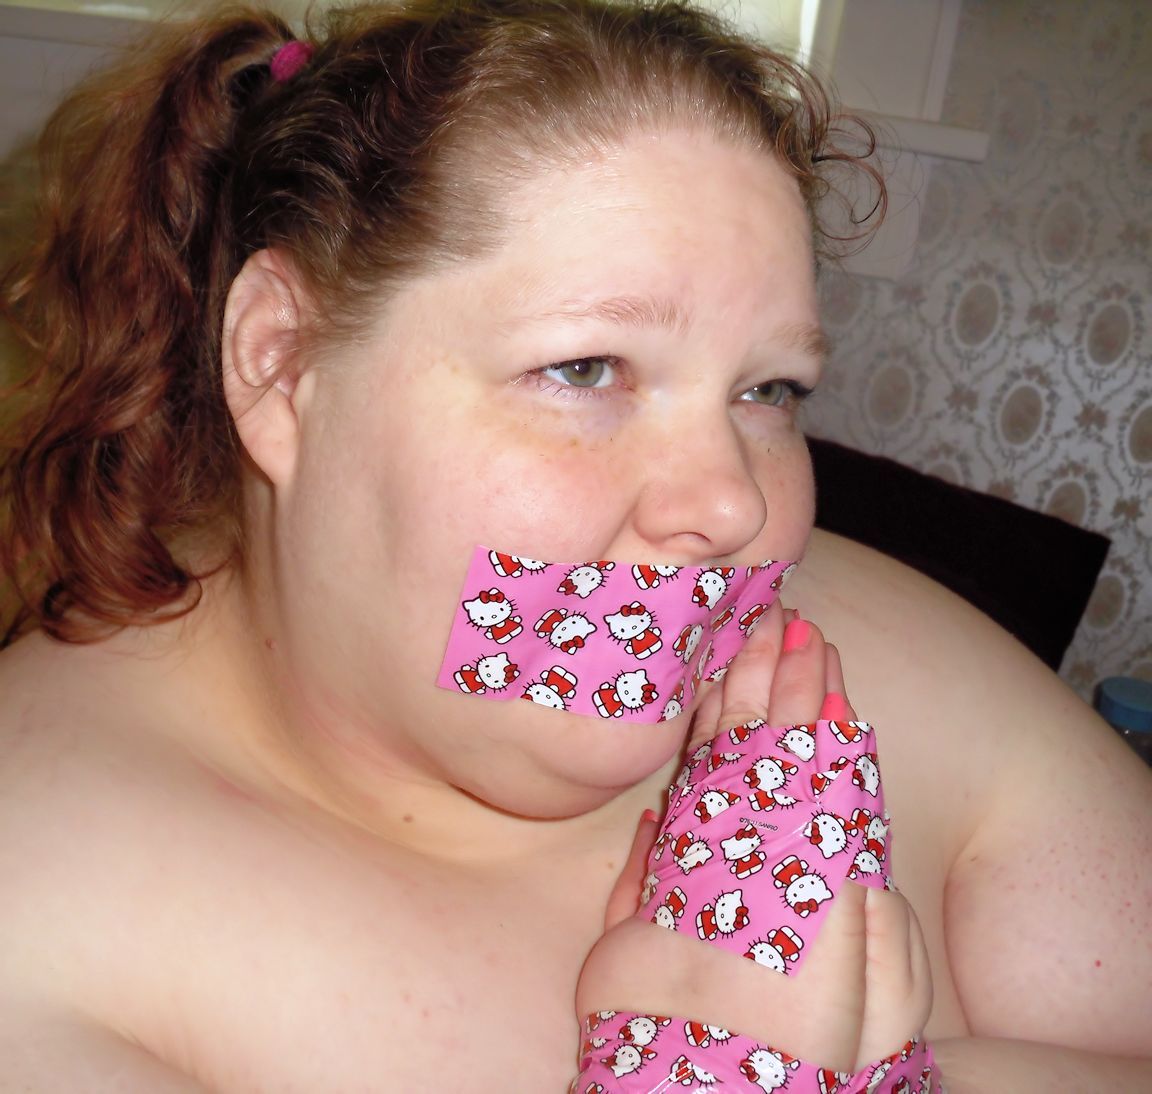 kinkylittlefatgirl:  Duct tape is so much fun. And Hello Kitty duct tape is simply